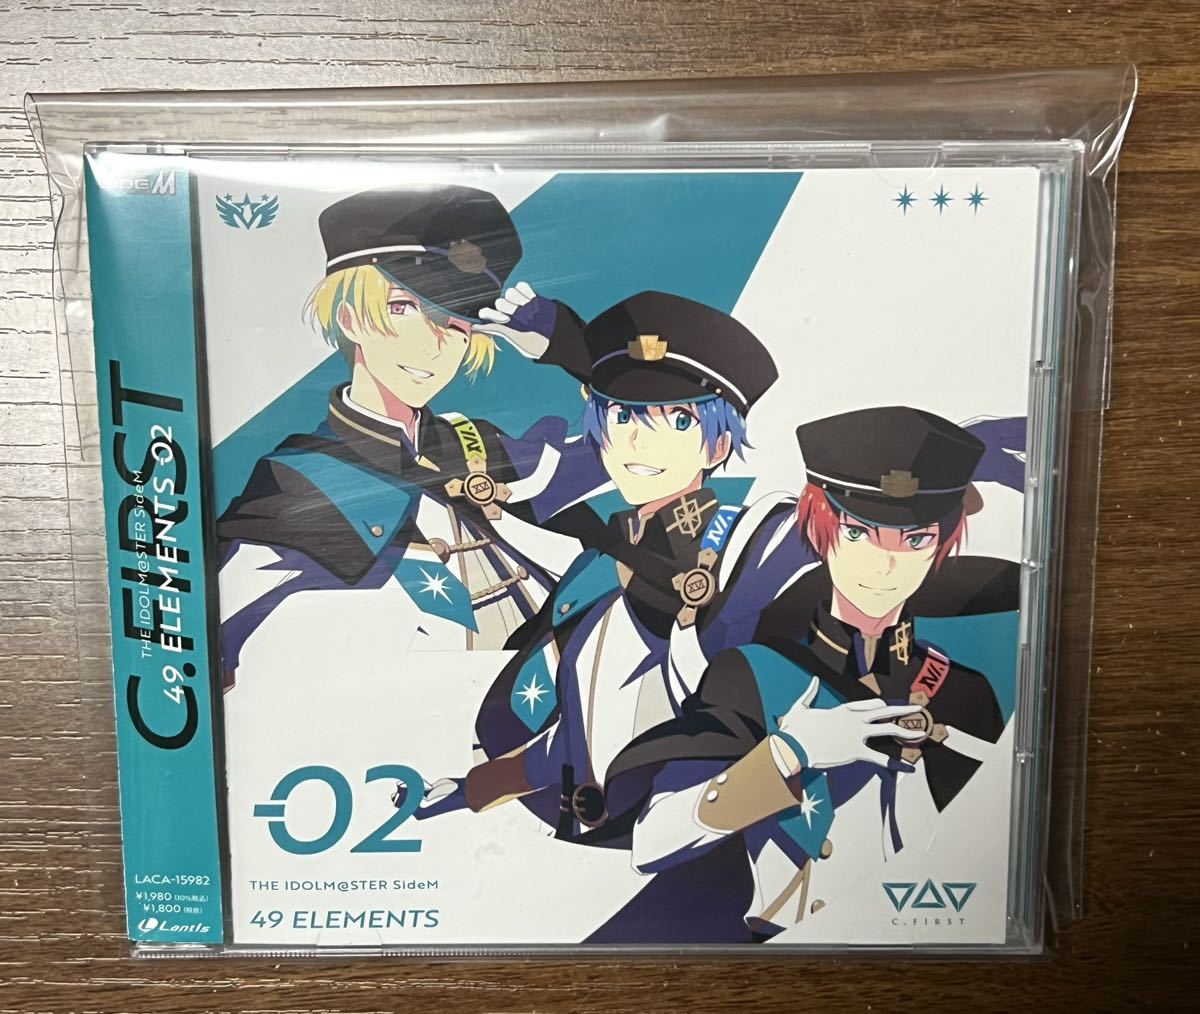 THE IDOLM@STER SideM 49 ELEMENTS -02 C.FIRST CD склад S